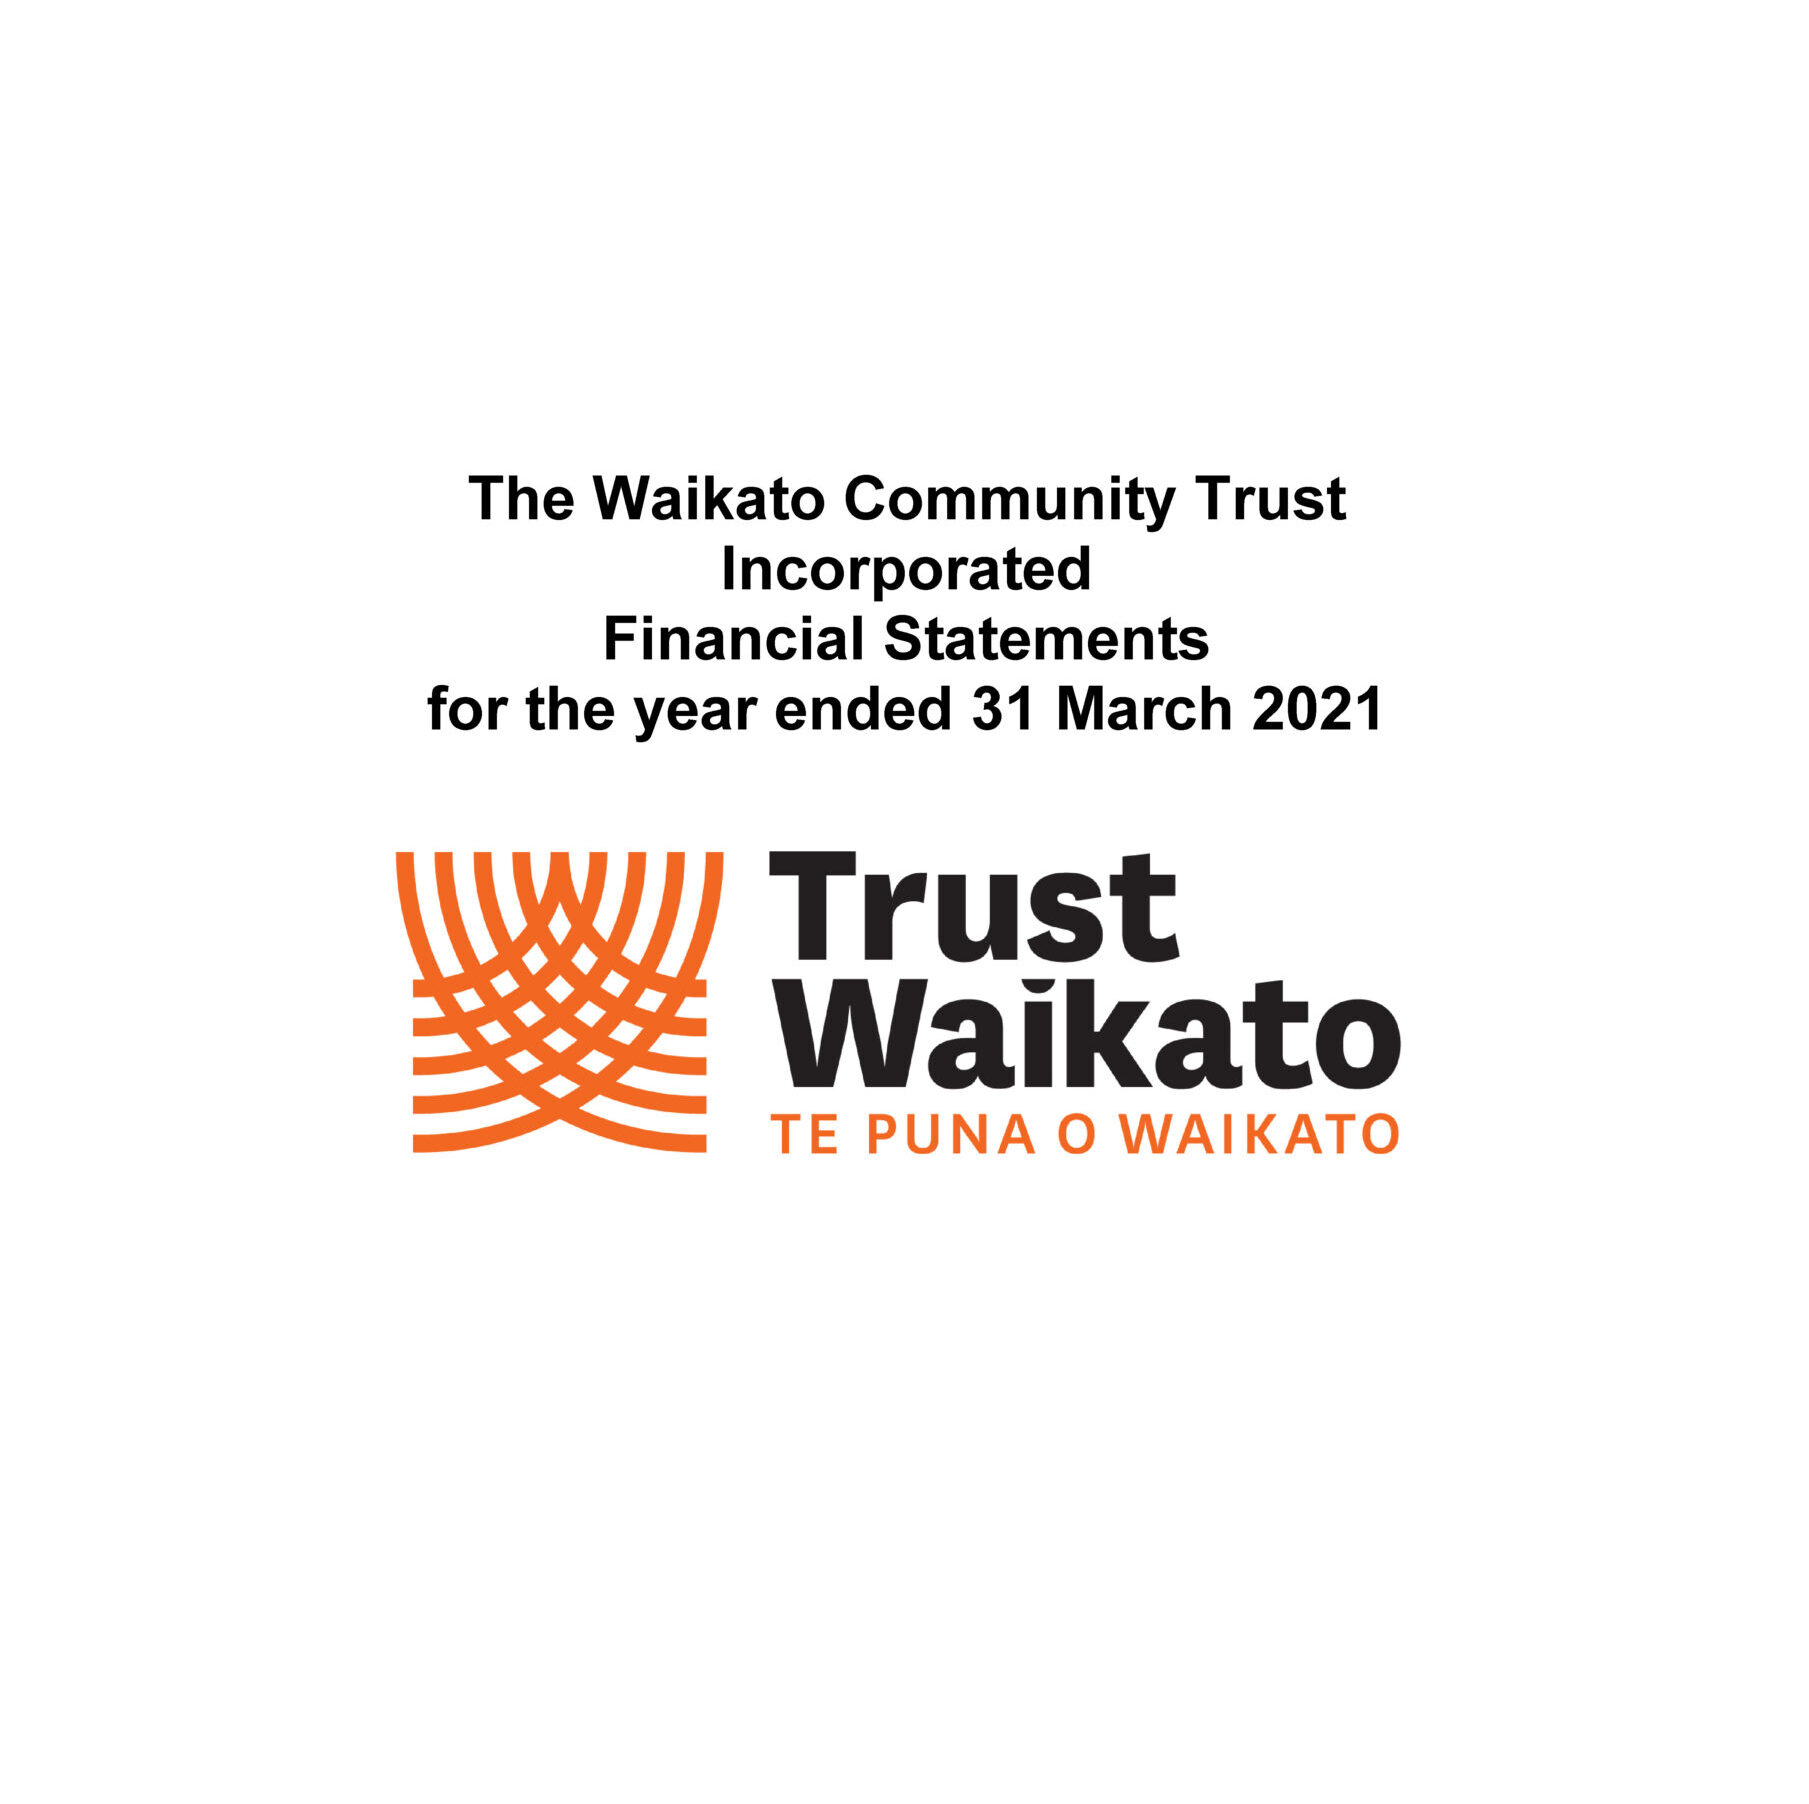 The Waikato Community Trust Incorporated Financial Statements for the year ended 31 March 2021